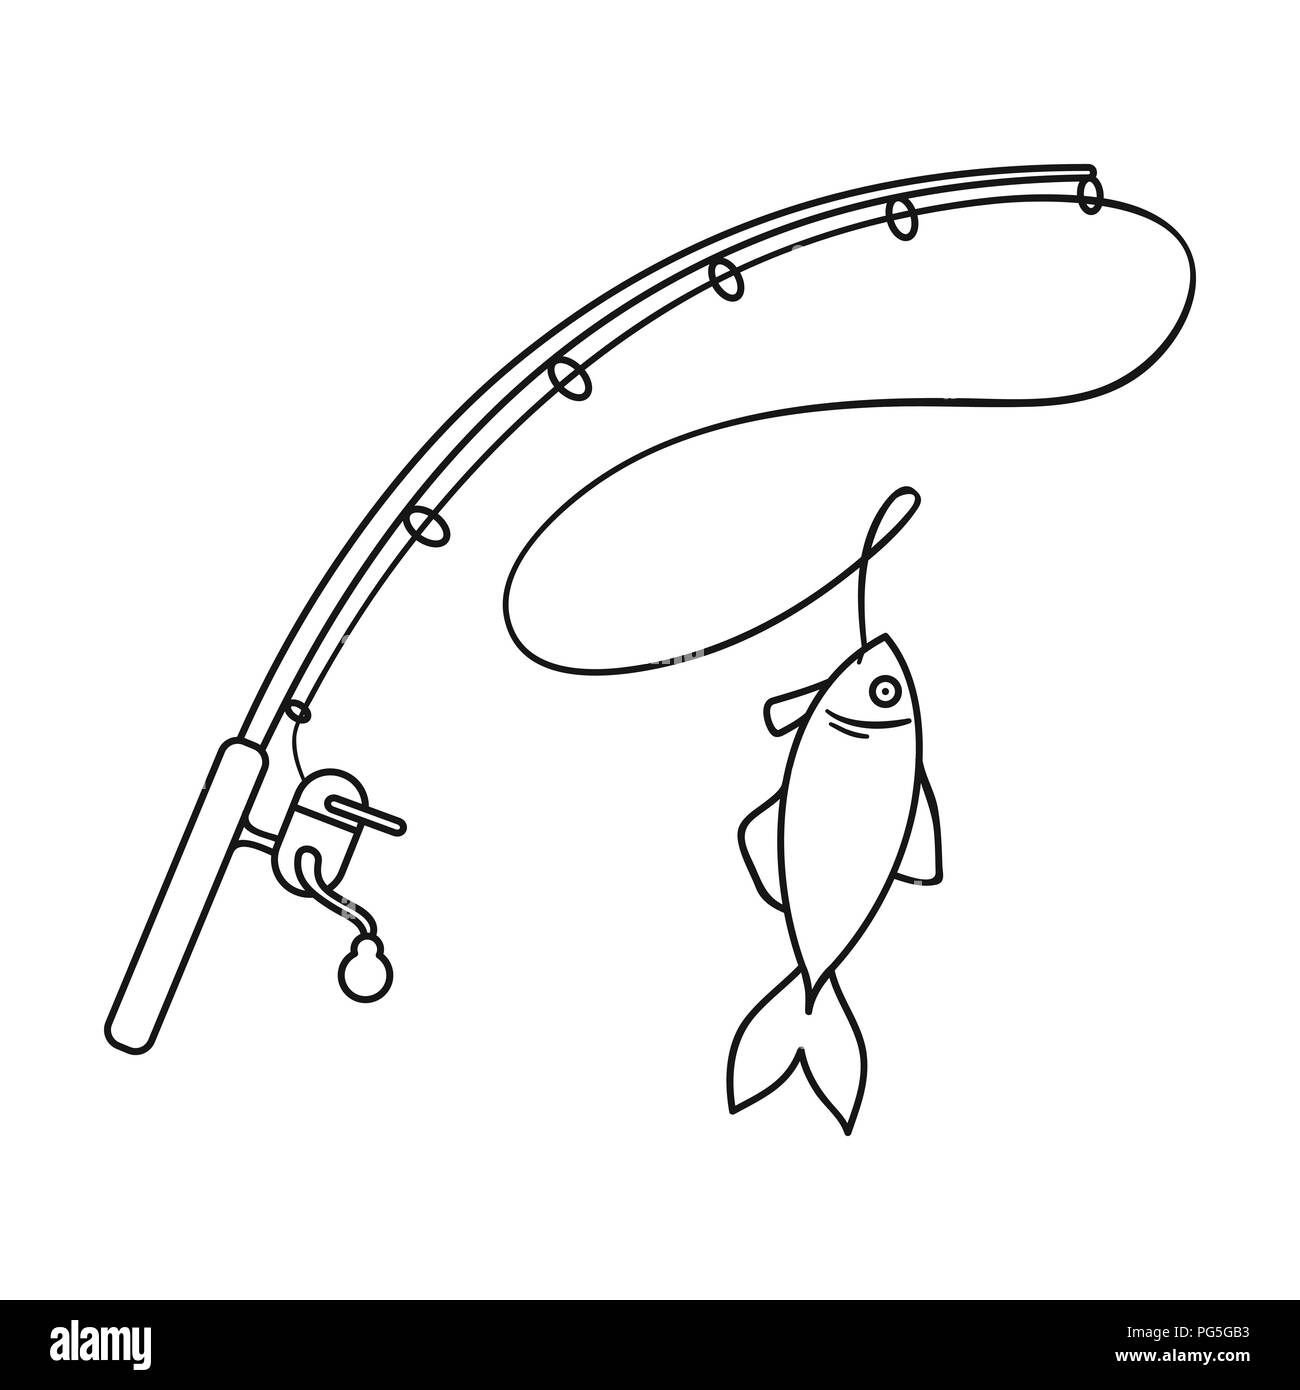 Fishing rod and fish icon in outline design isolated on white background.  Fishing symbol stock vector illustration Stock Vector Image & Art - Alamy